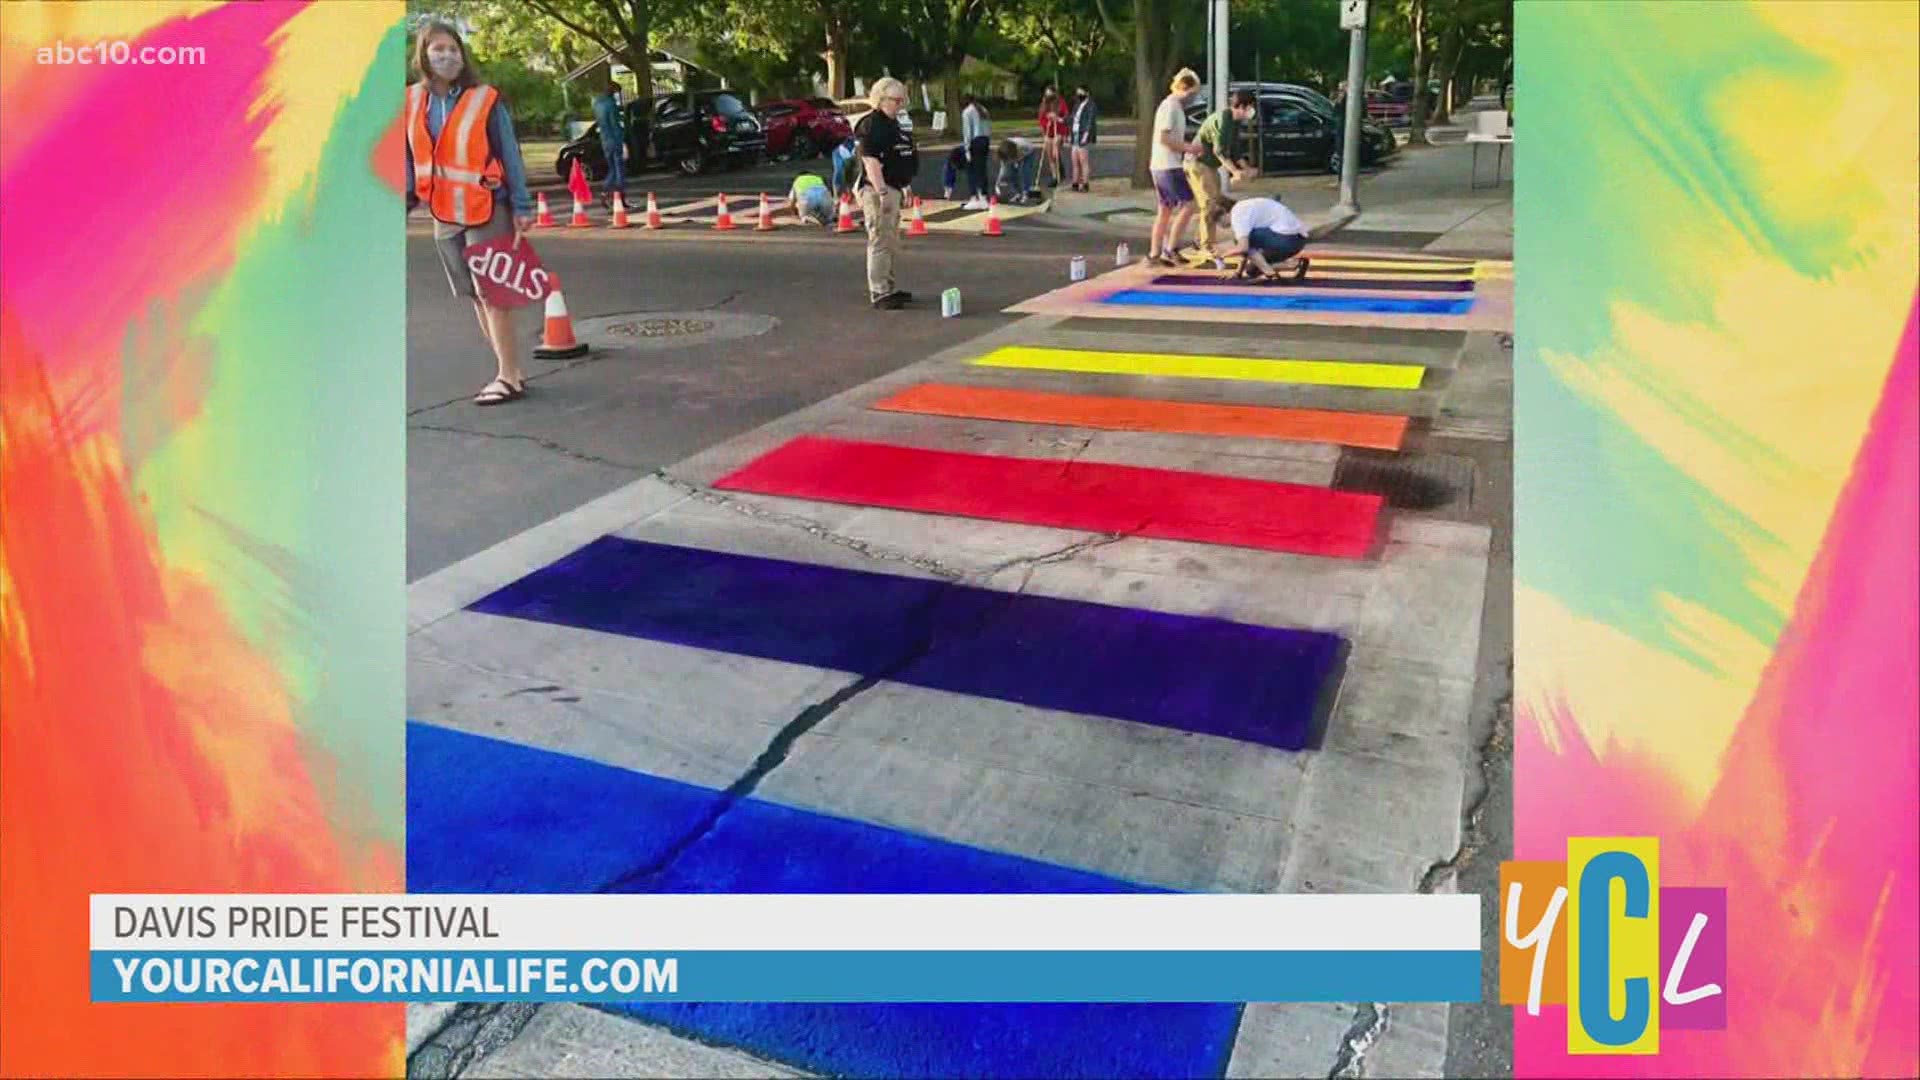 Rainbow crosswalks, live music, drag queens and skating are all on the calendar as Davis celebrates Pride Month.